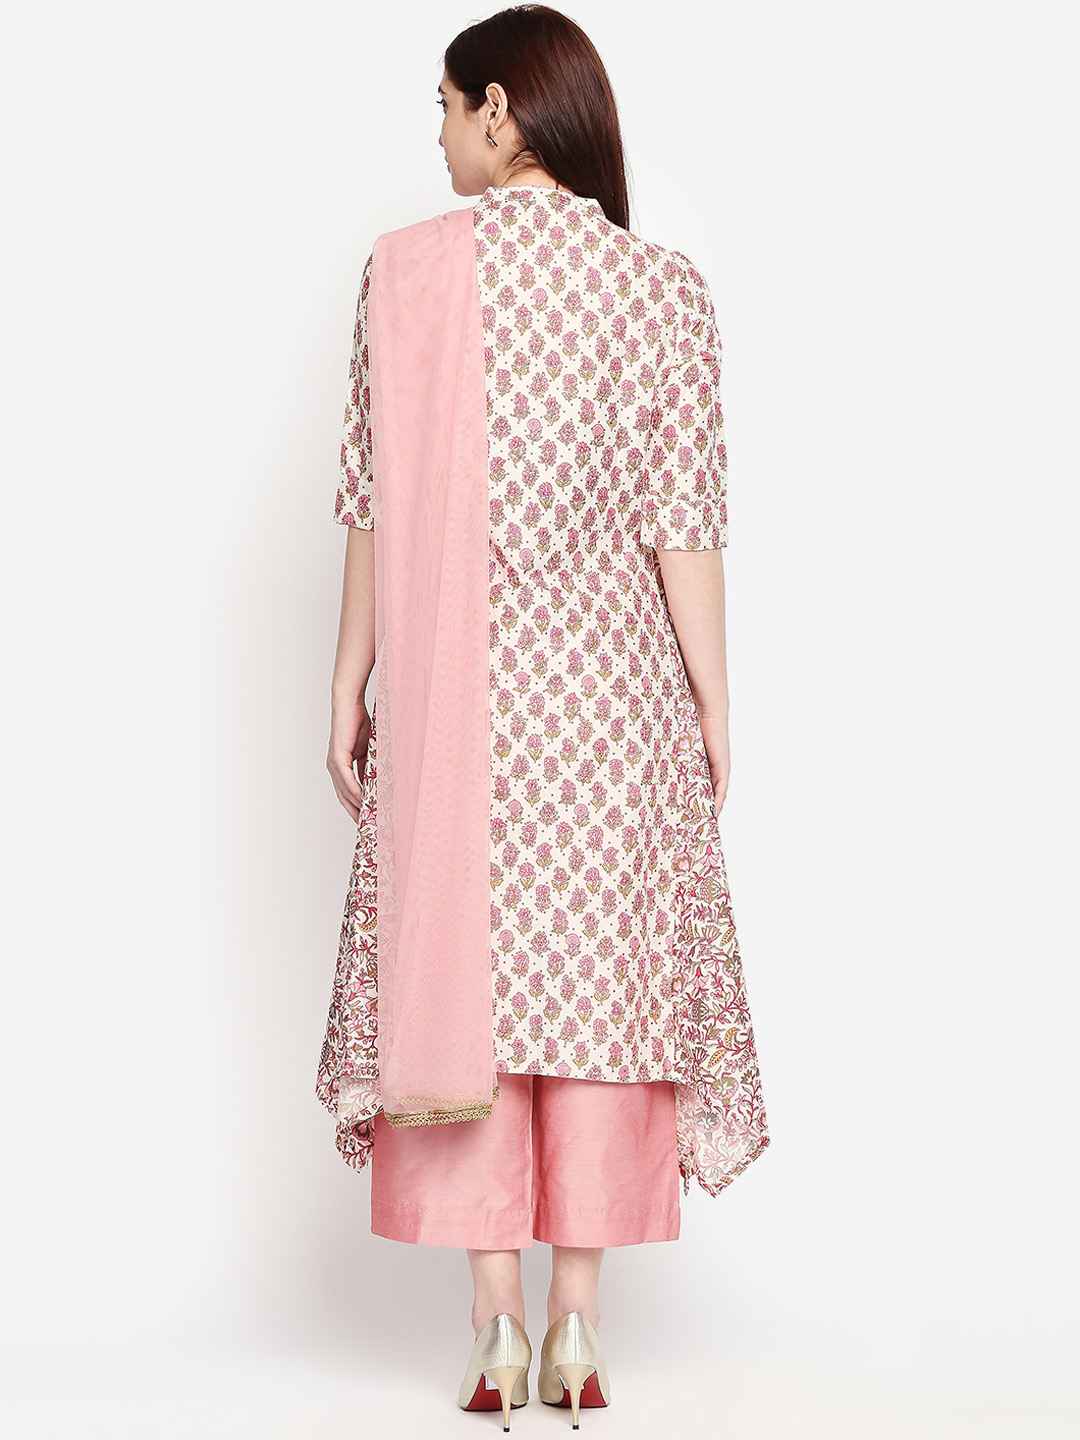 RANGMANCH-BY-PANTALOONS-Women-Off-White-and-Pink-Printed-Kurta-with-Trousers-and-Dupatta